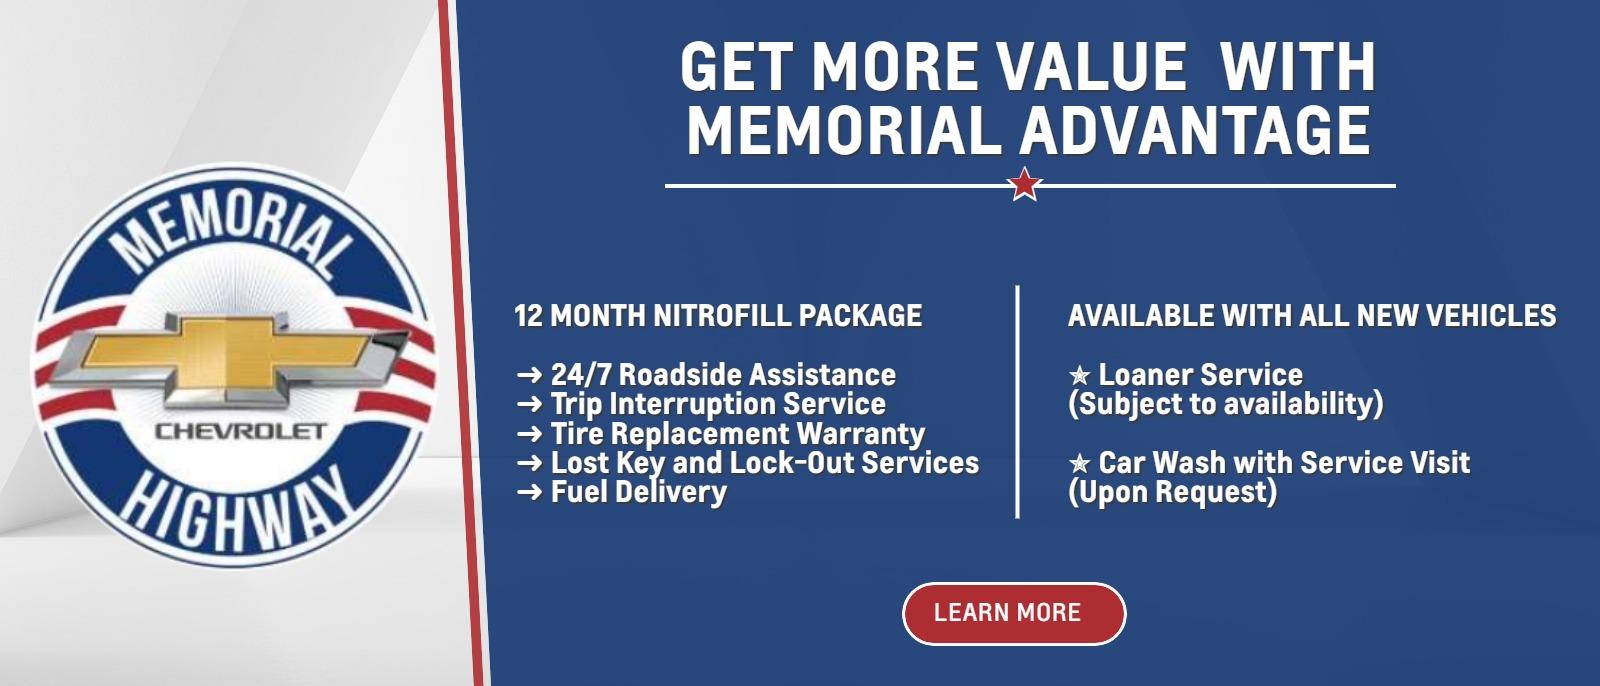 GET MORE VALUE  WITH MEMORIAL ADVANTAGE
12 MONTH NITROFILL PACKAGE
➜ 24/7 Roadside Assistance
➜ Trip Interruption Service
➜ Tire Replacement Warranty
➜ Lost Key and Lock-Out Services
➜ Fuel Delivery

AVAILABLE WITH ALL NEW VEHICLES
✮ Loaner Service (Subject to availability)
✮ Car Wash with Service Visit (Upon Request)